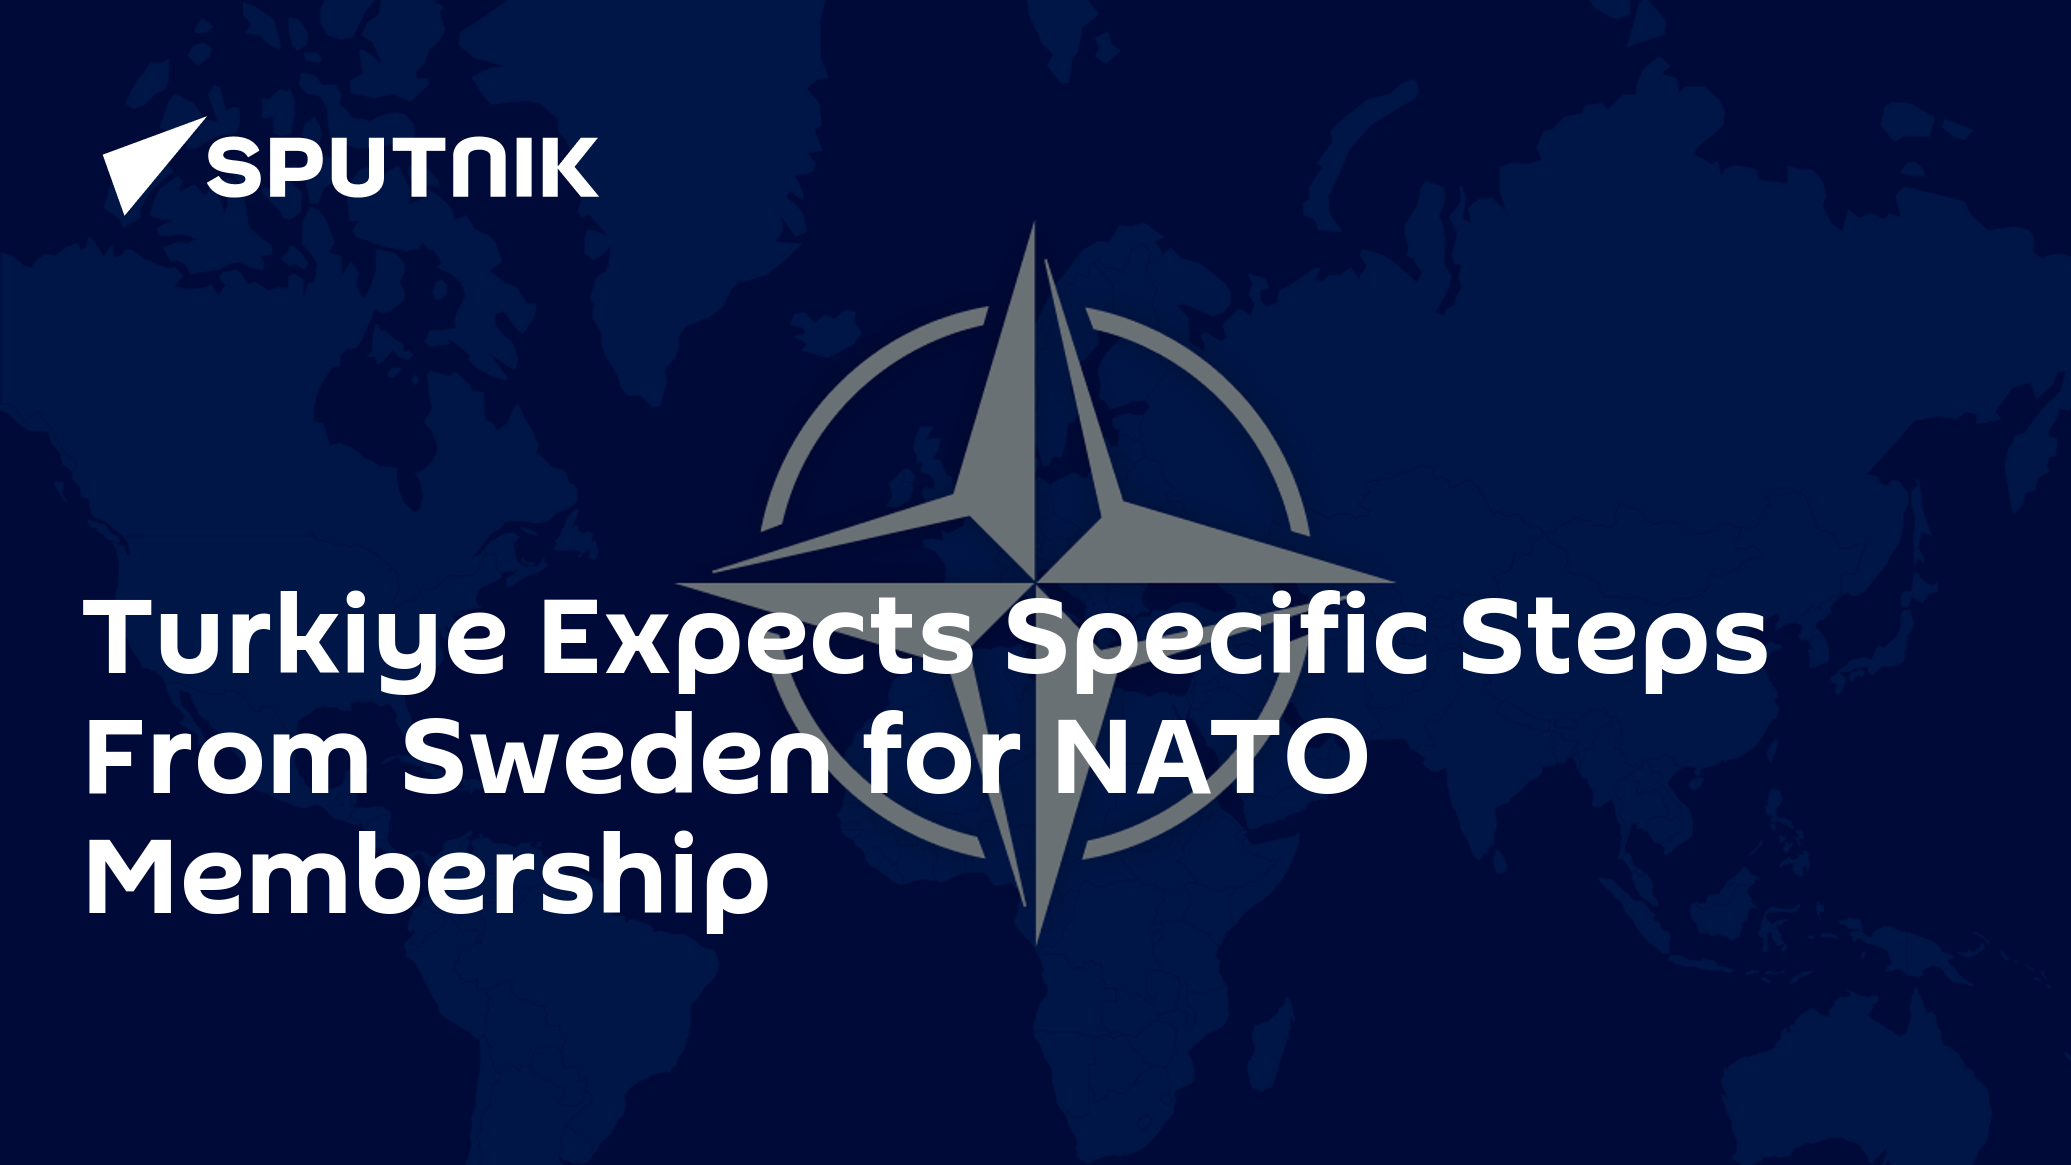 Turkiye Expects Specific Steps From Sweden for NATO Membership